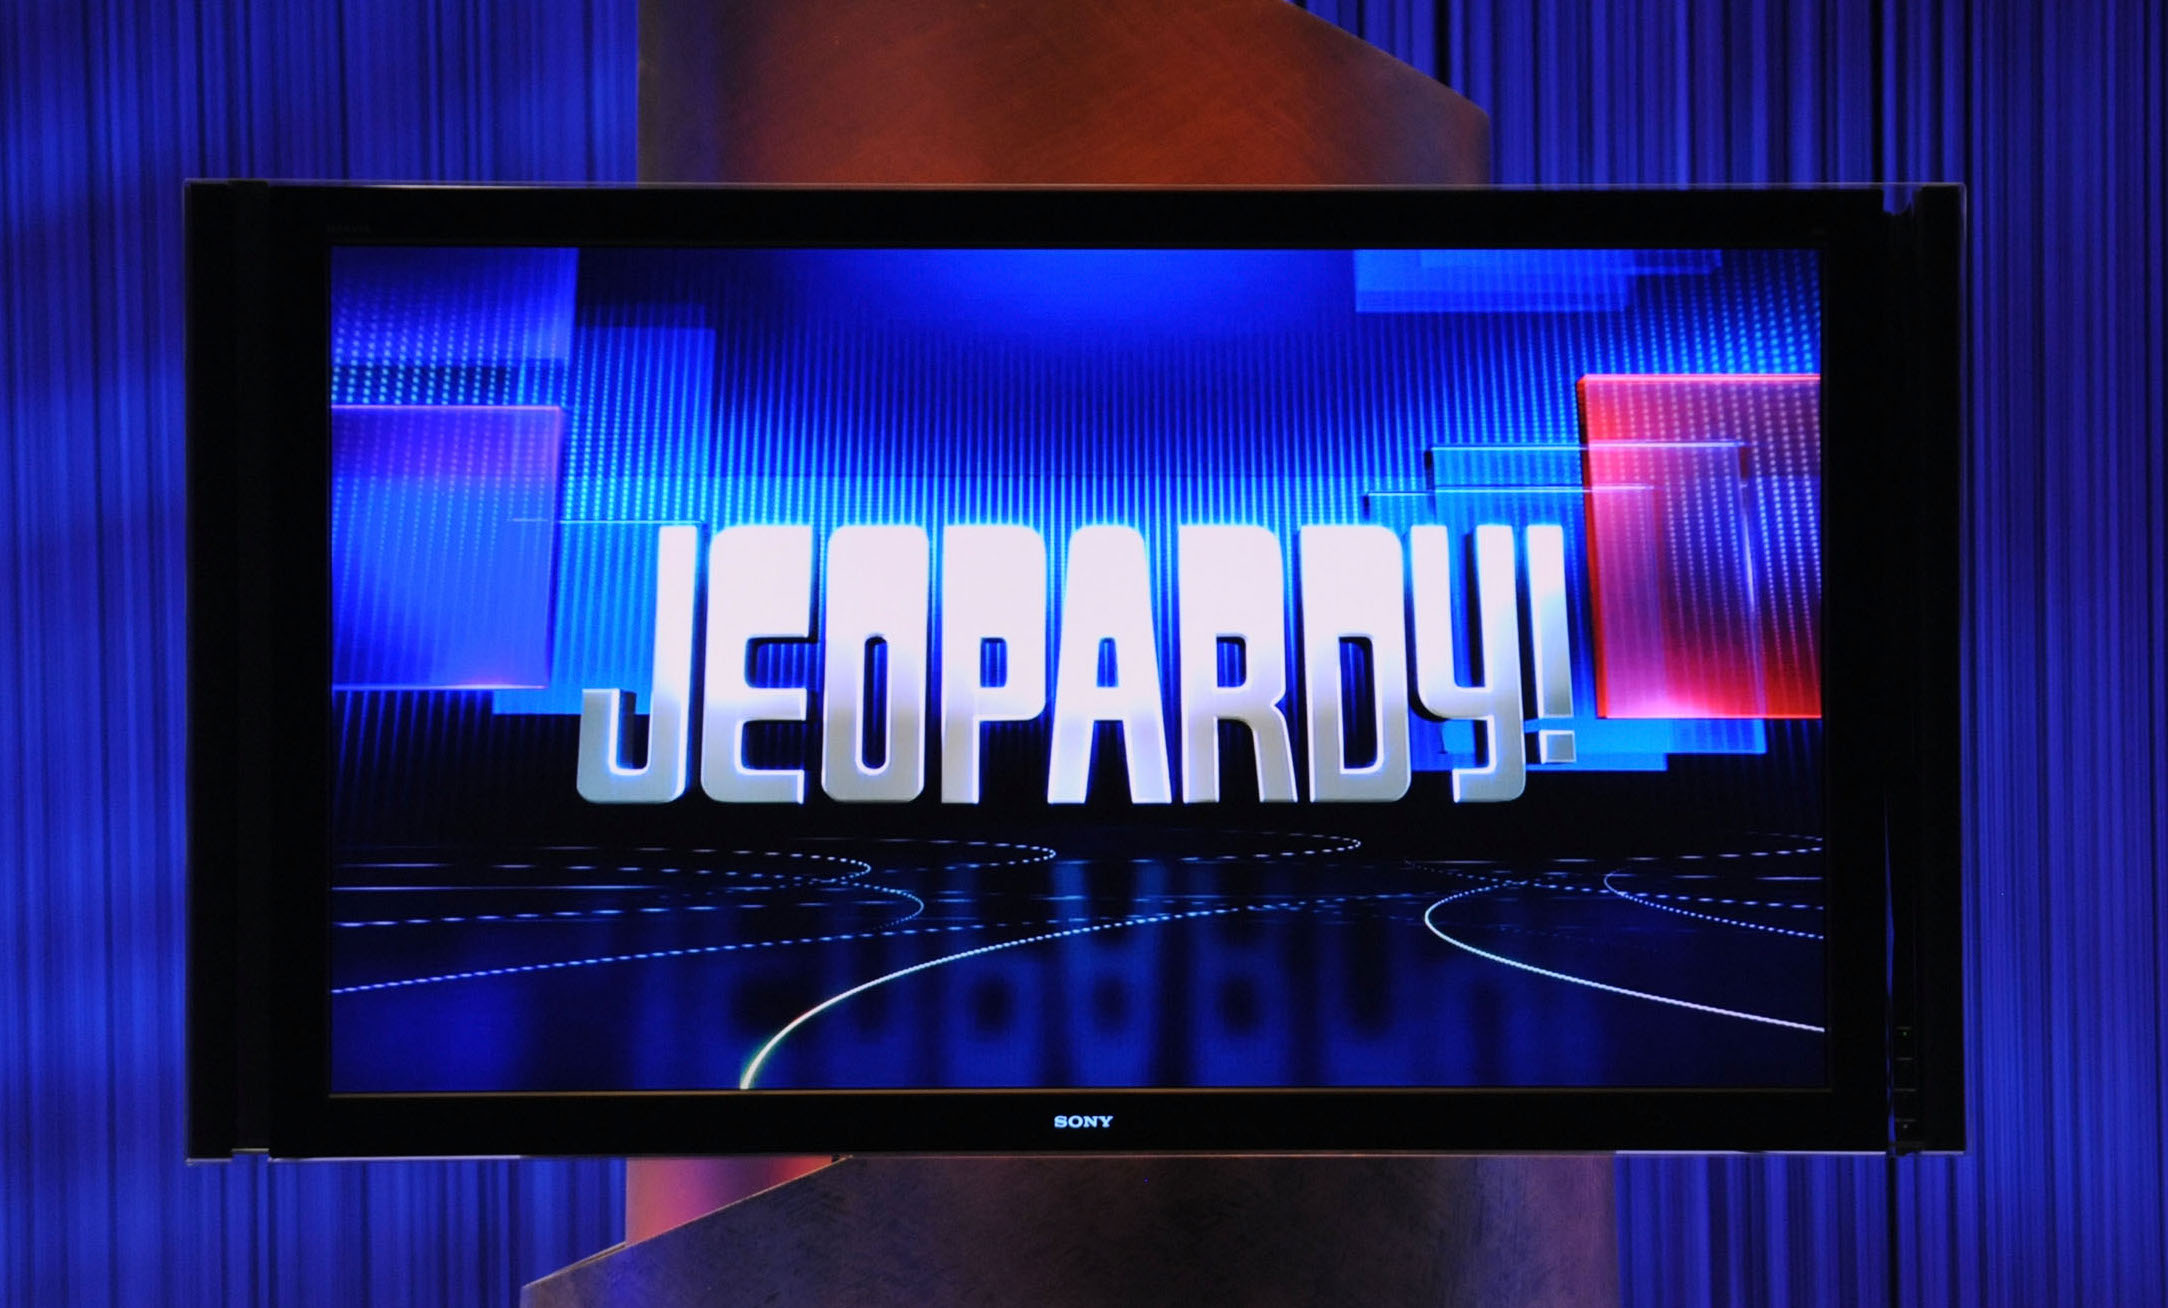 WWE's Becky Lynch Makes 'Jeopardy!' History by Going 0 for 60